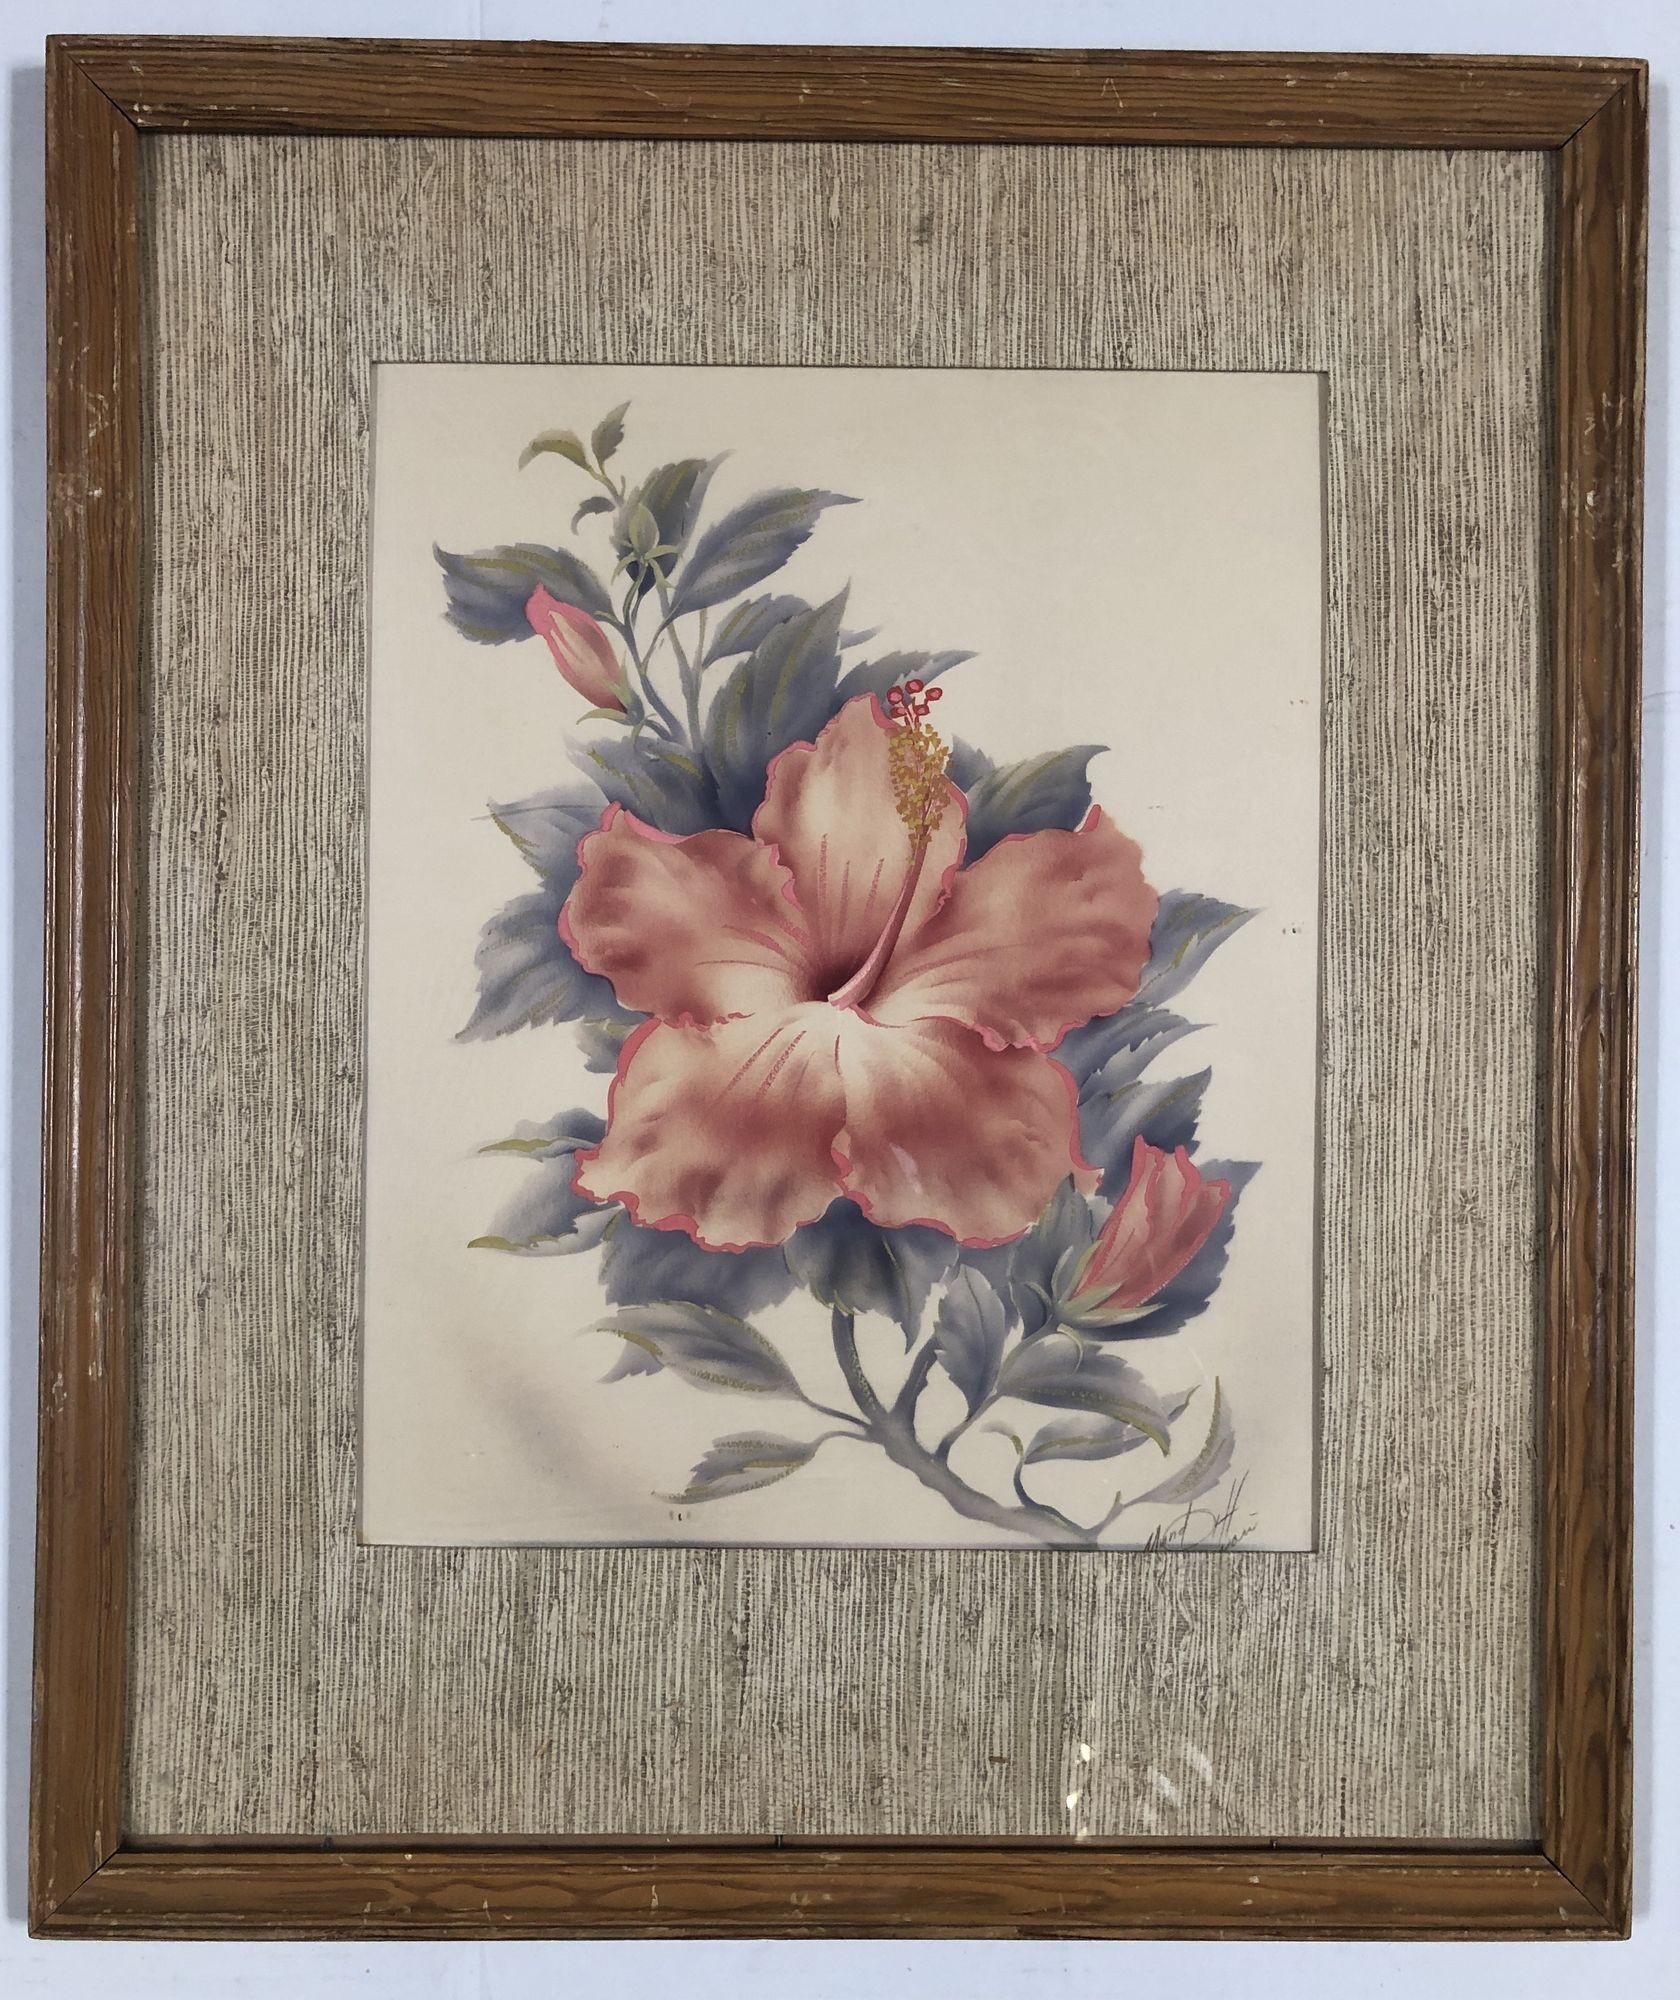 This set of 2 1940s original airbrush artwork paintings of Hibiscus florals by Ted Mundorff. One is yellow and one is red. Both pieces have in their original grass mat picture frames.

A great addition to your art wall collection.

Both frames